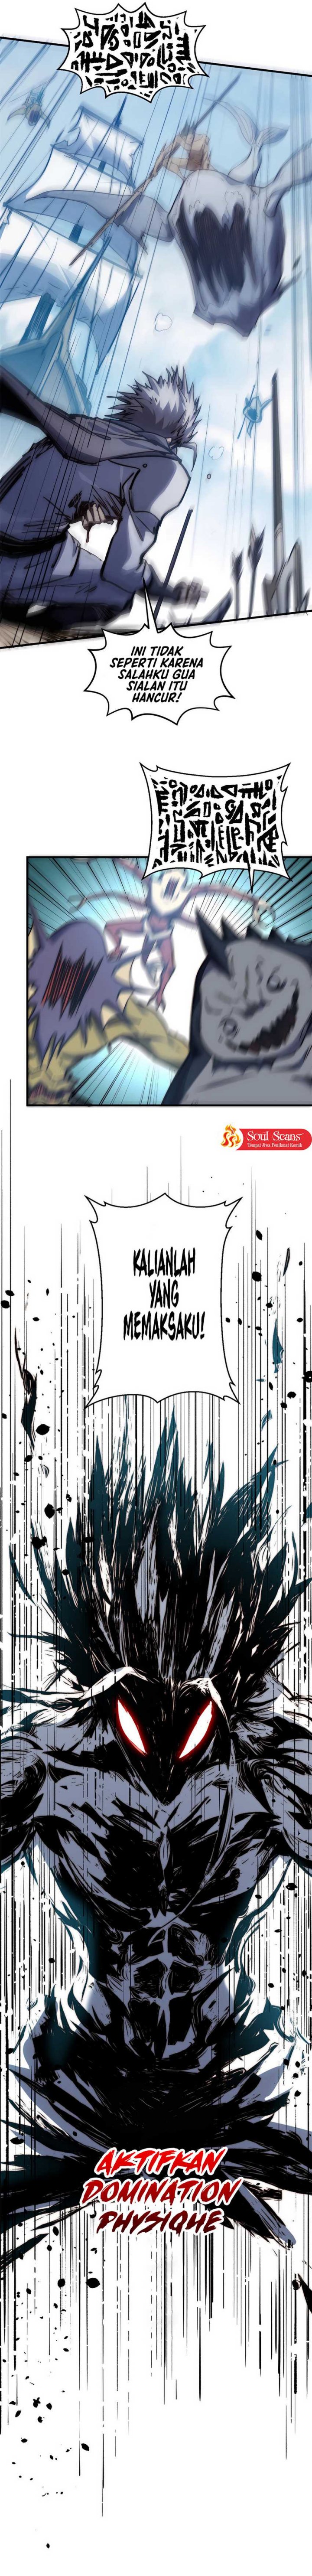 Dilarang COPAS - situs resmi www.mangacanblog.com - Komik top tier providence secretly cultivate for a thousand years 119 - chapter 119 120 Indonesia top tier providence secretly cultivate for a thousand years 119 - chapter 119 Terbaru 12|Baca Manga Komik Indonesia|Mangacan